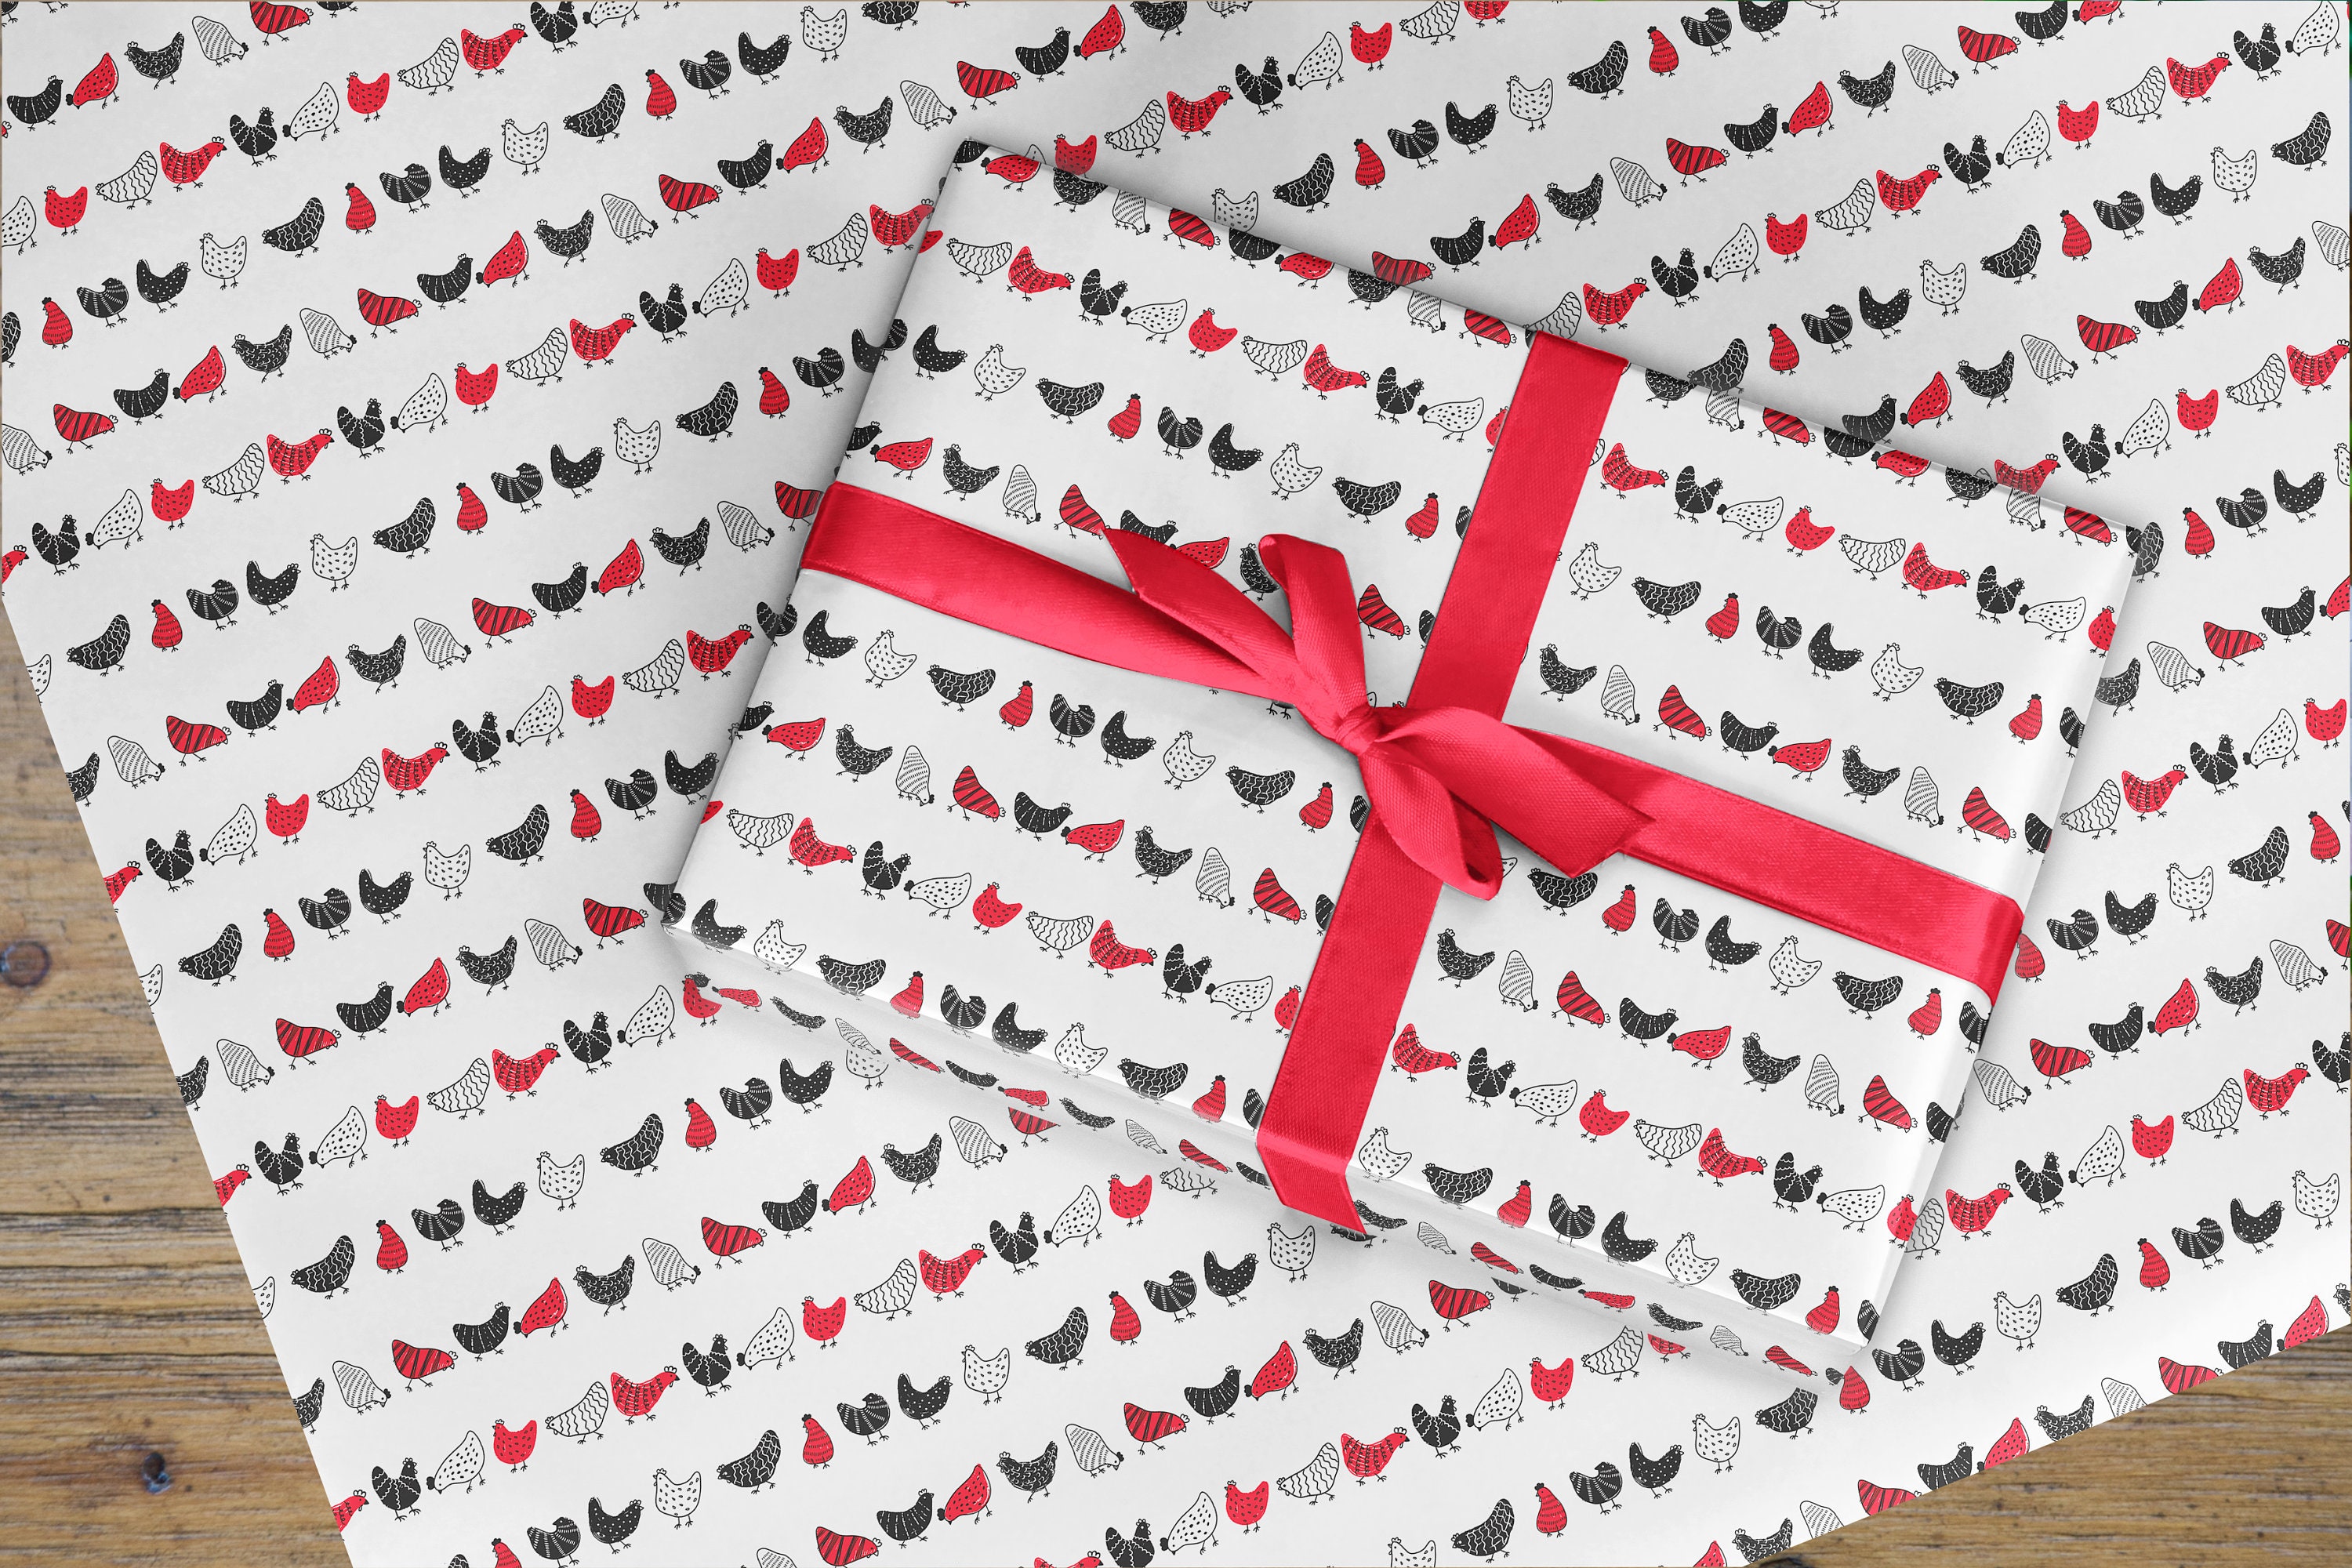 Ban Slaughter Chicken Wrapping paper sheets — Our Honor